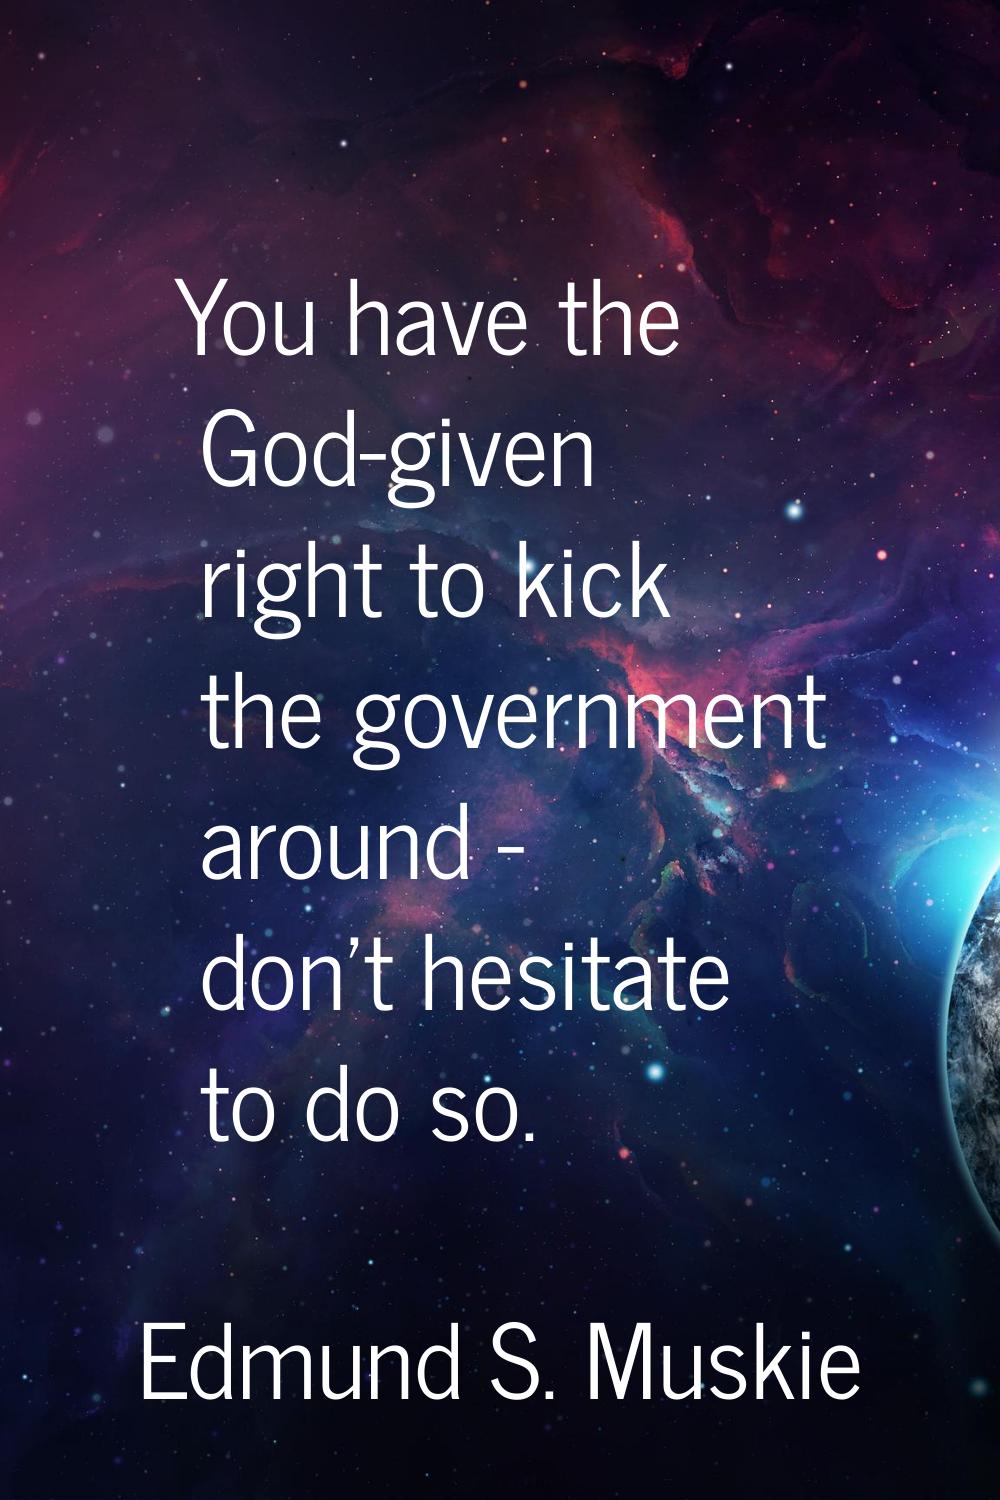 You have the God-given right to kick the government around - don't hesitate to do so.